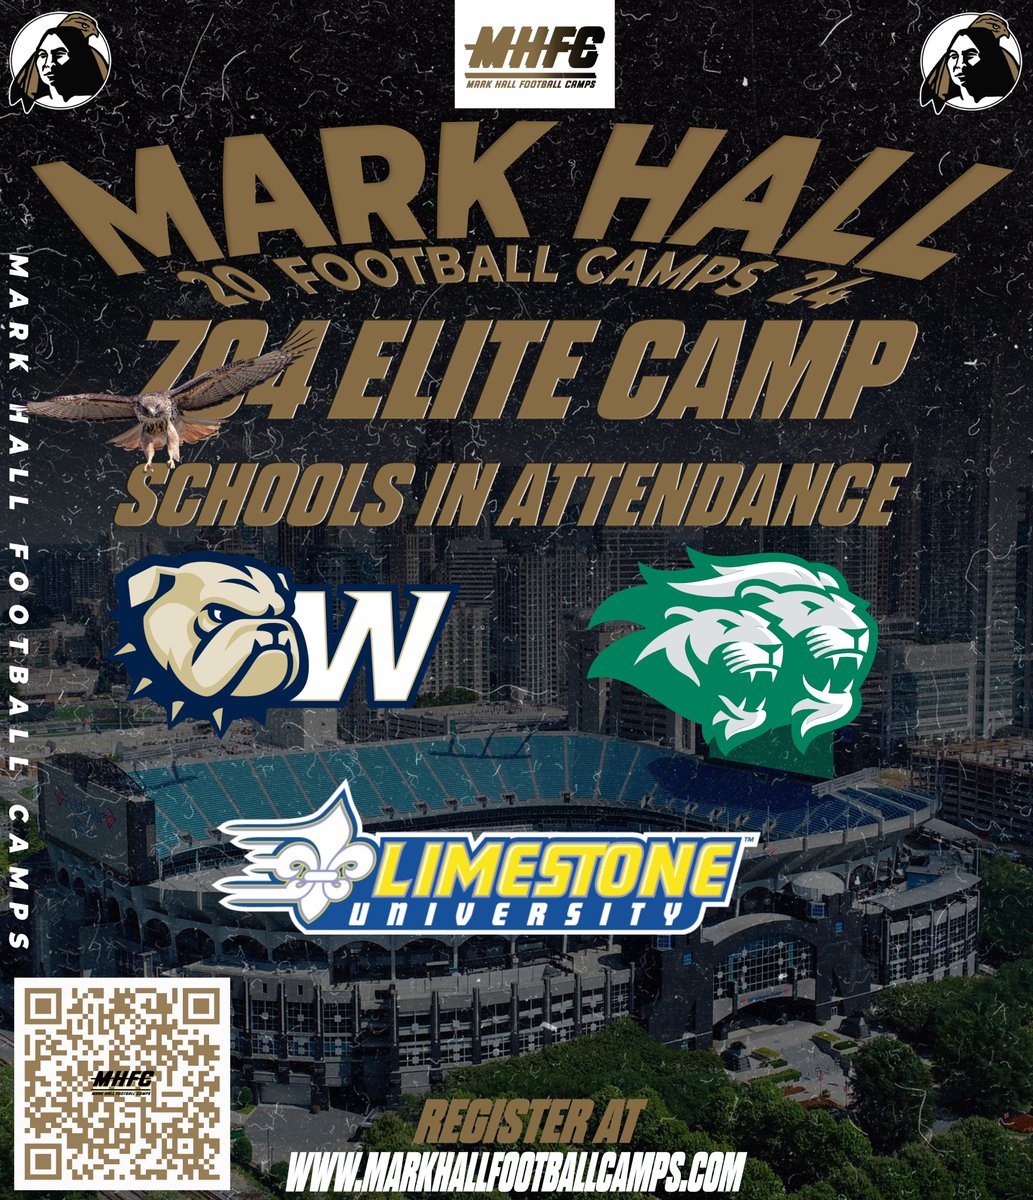 🚨CAMP UPDATE🚨 WE WILL NOW HAVE VISITING COACHES FROM SOME GREAT PROGRAMS ATTENDING OUR CAMP IN CHARLOTTE TOMORROW NIGHT!! GREAT OPPORTUNITY TO BE SEEN!! THERE IS STILL TIME TO SIGN UP: markhallfootballcamps.com/event-details-…